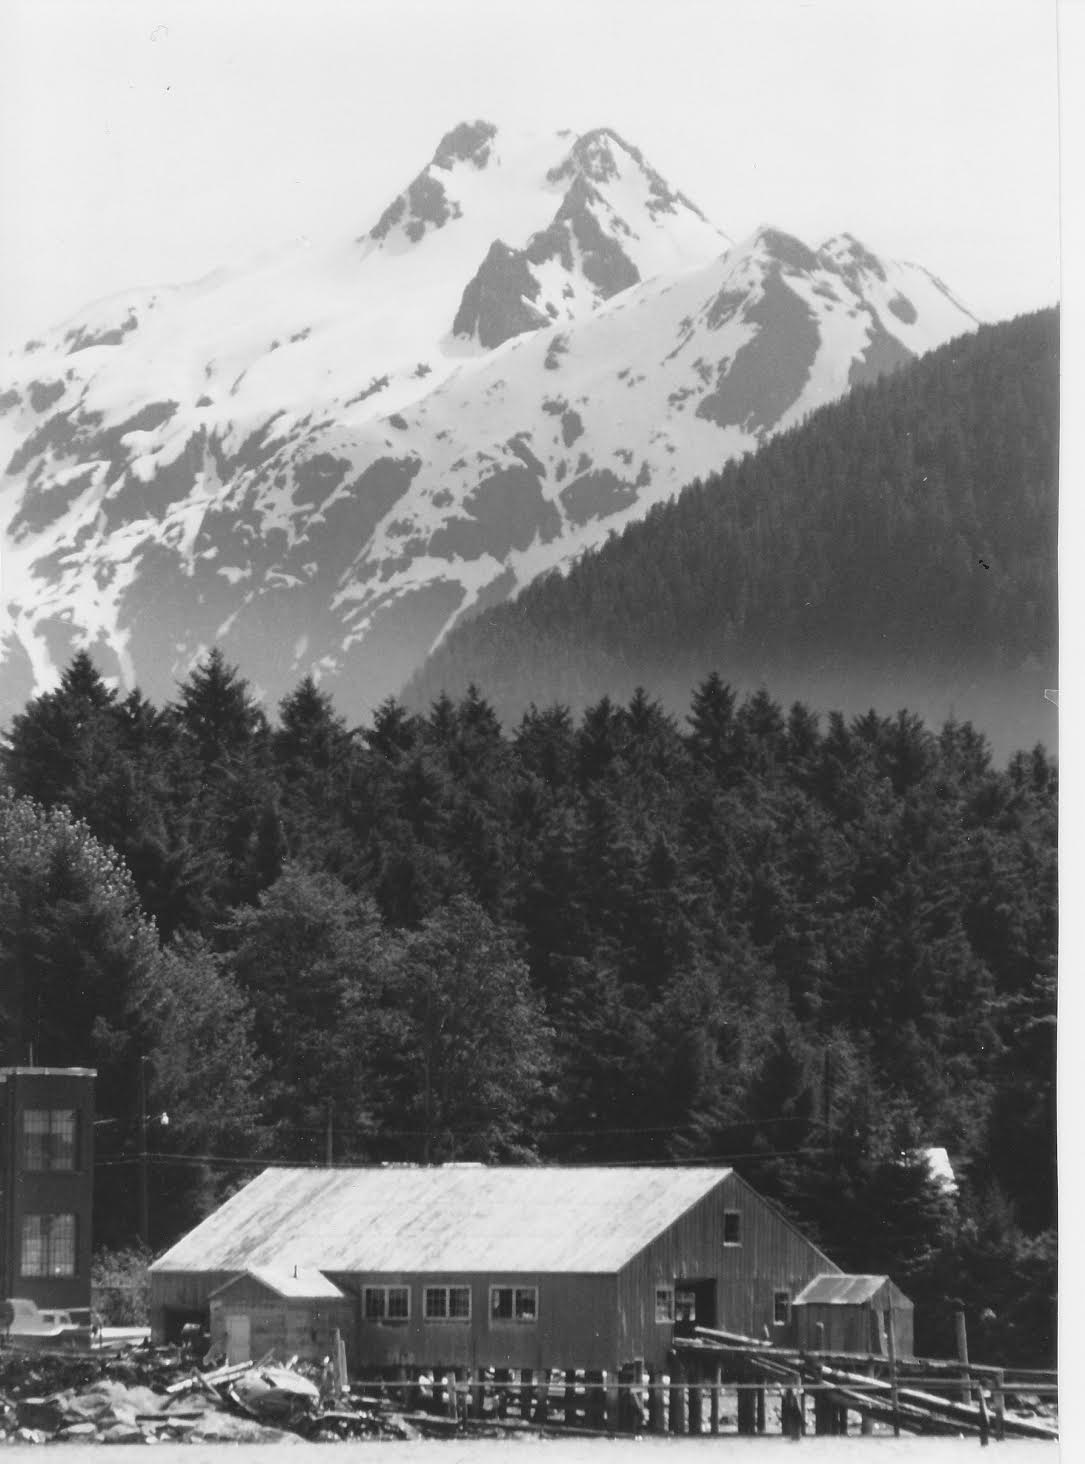 The original mill building, constructed in 1934. (Photo courtesy Sitka Sound Science Center)